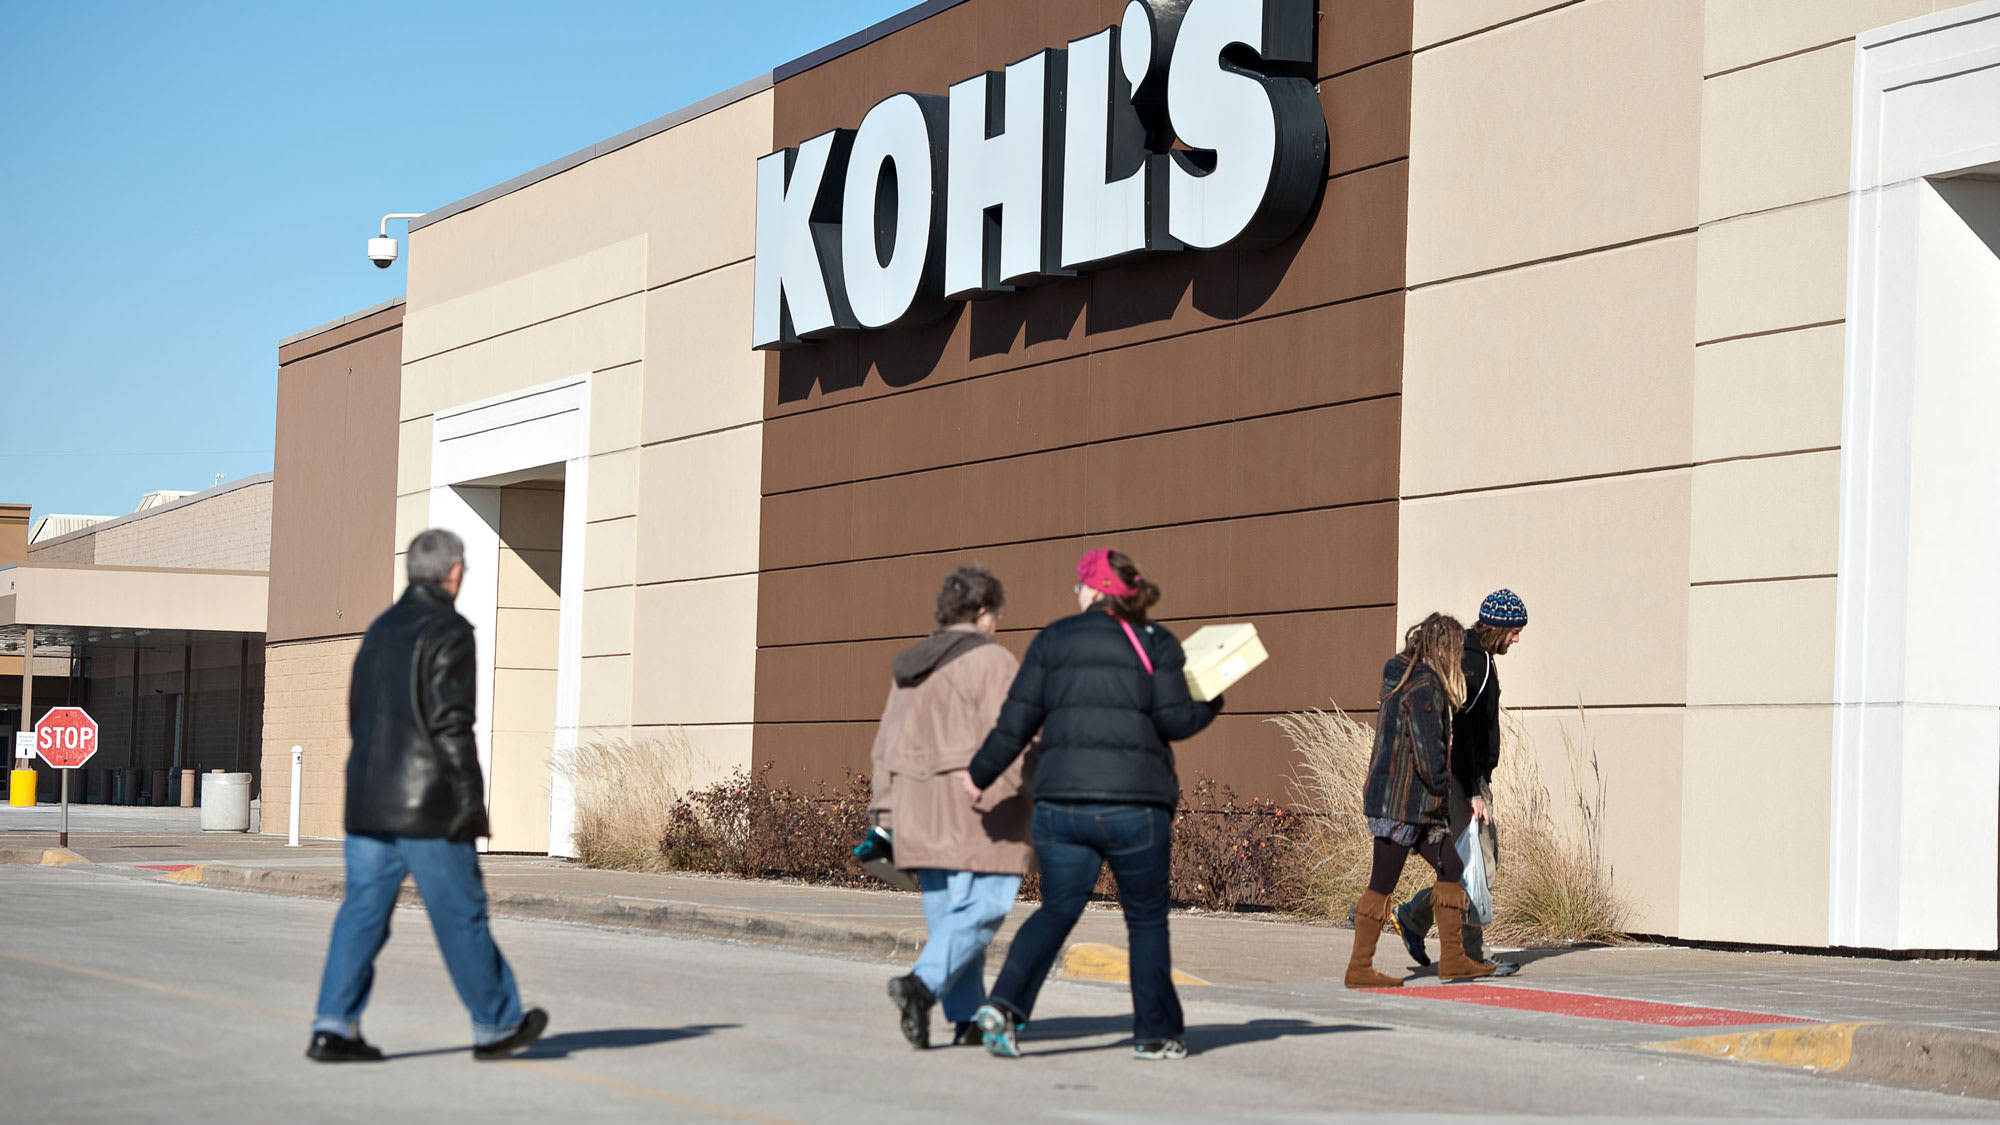 Kohl’s shares tank on dismal vacation gross sales outcomes, lowered outlook